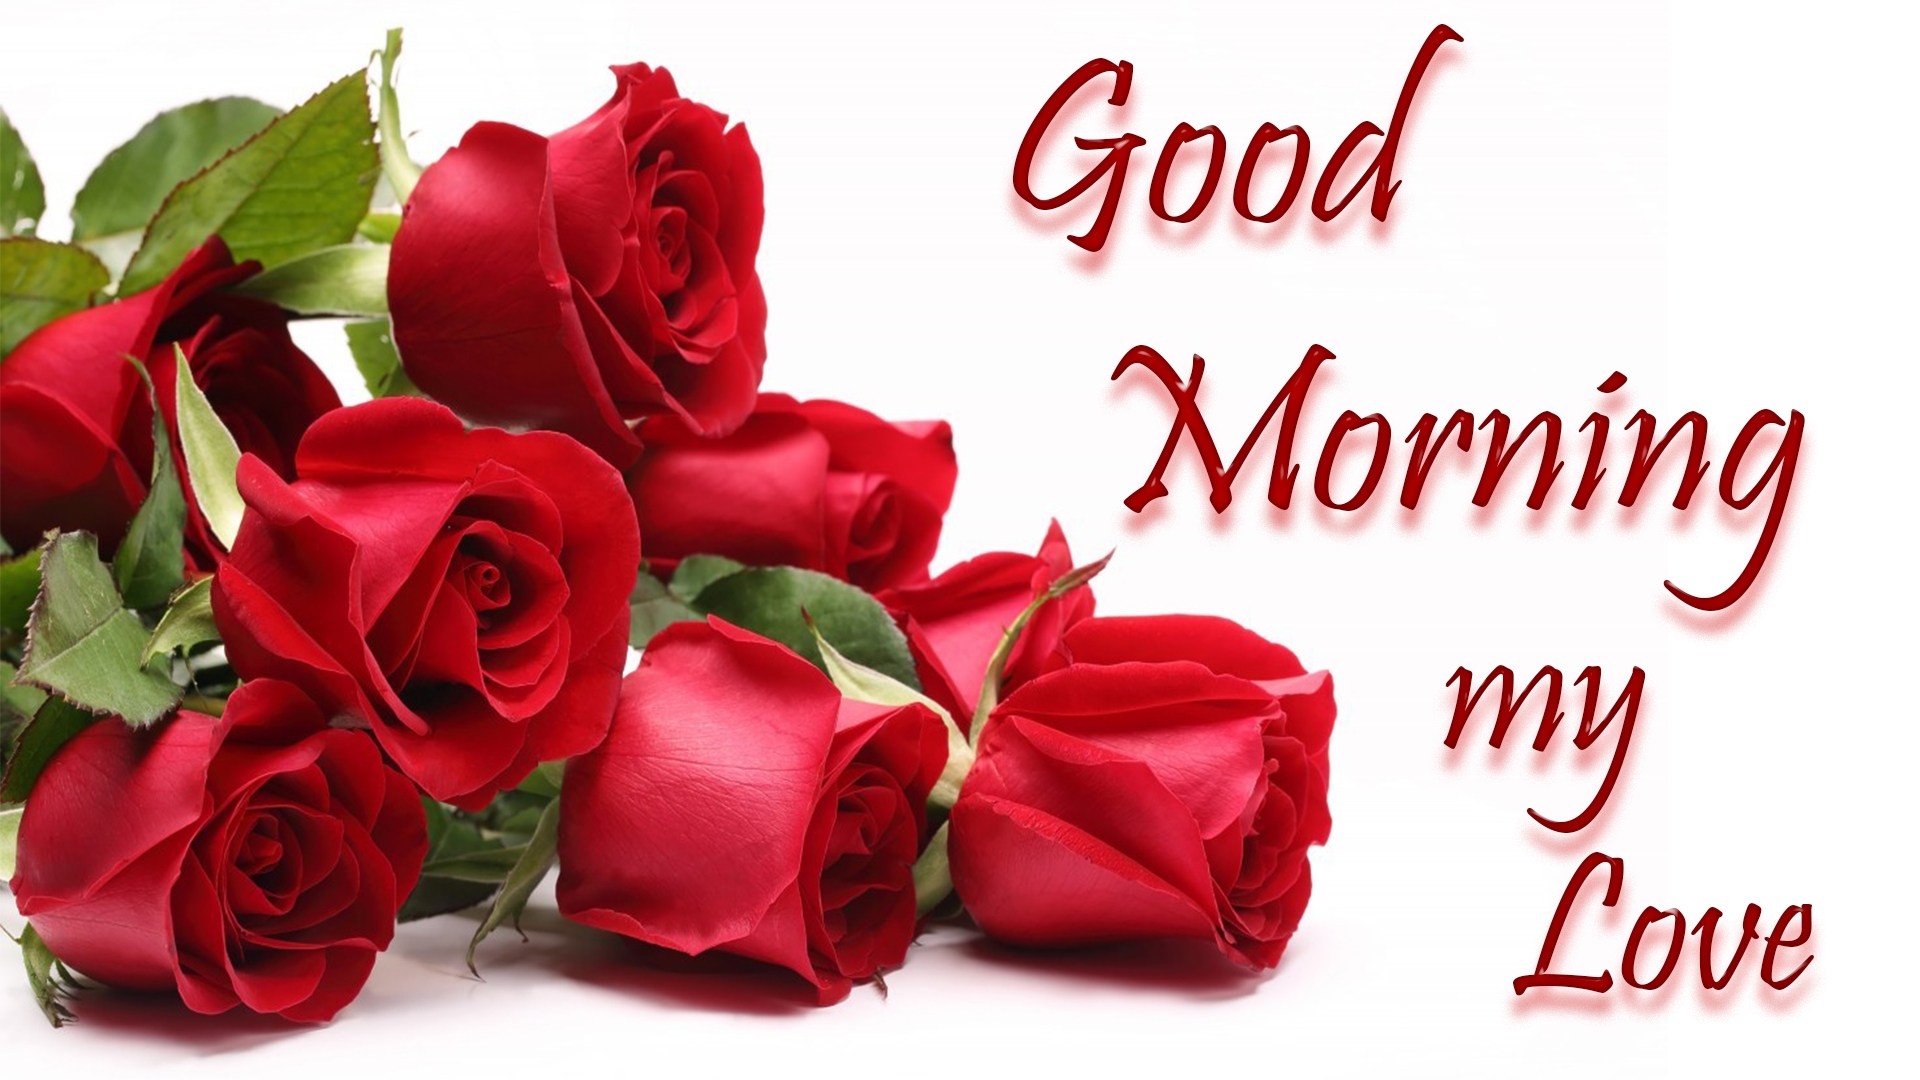 Good Morning My Love Images & Hd Pictures - Good Morning Rose For My Love , HD Wallpaper & Backgrounds